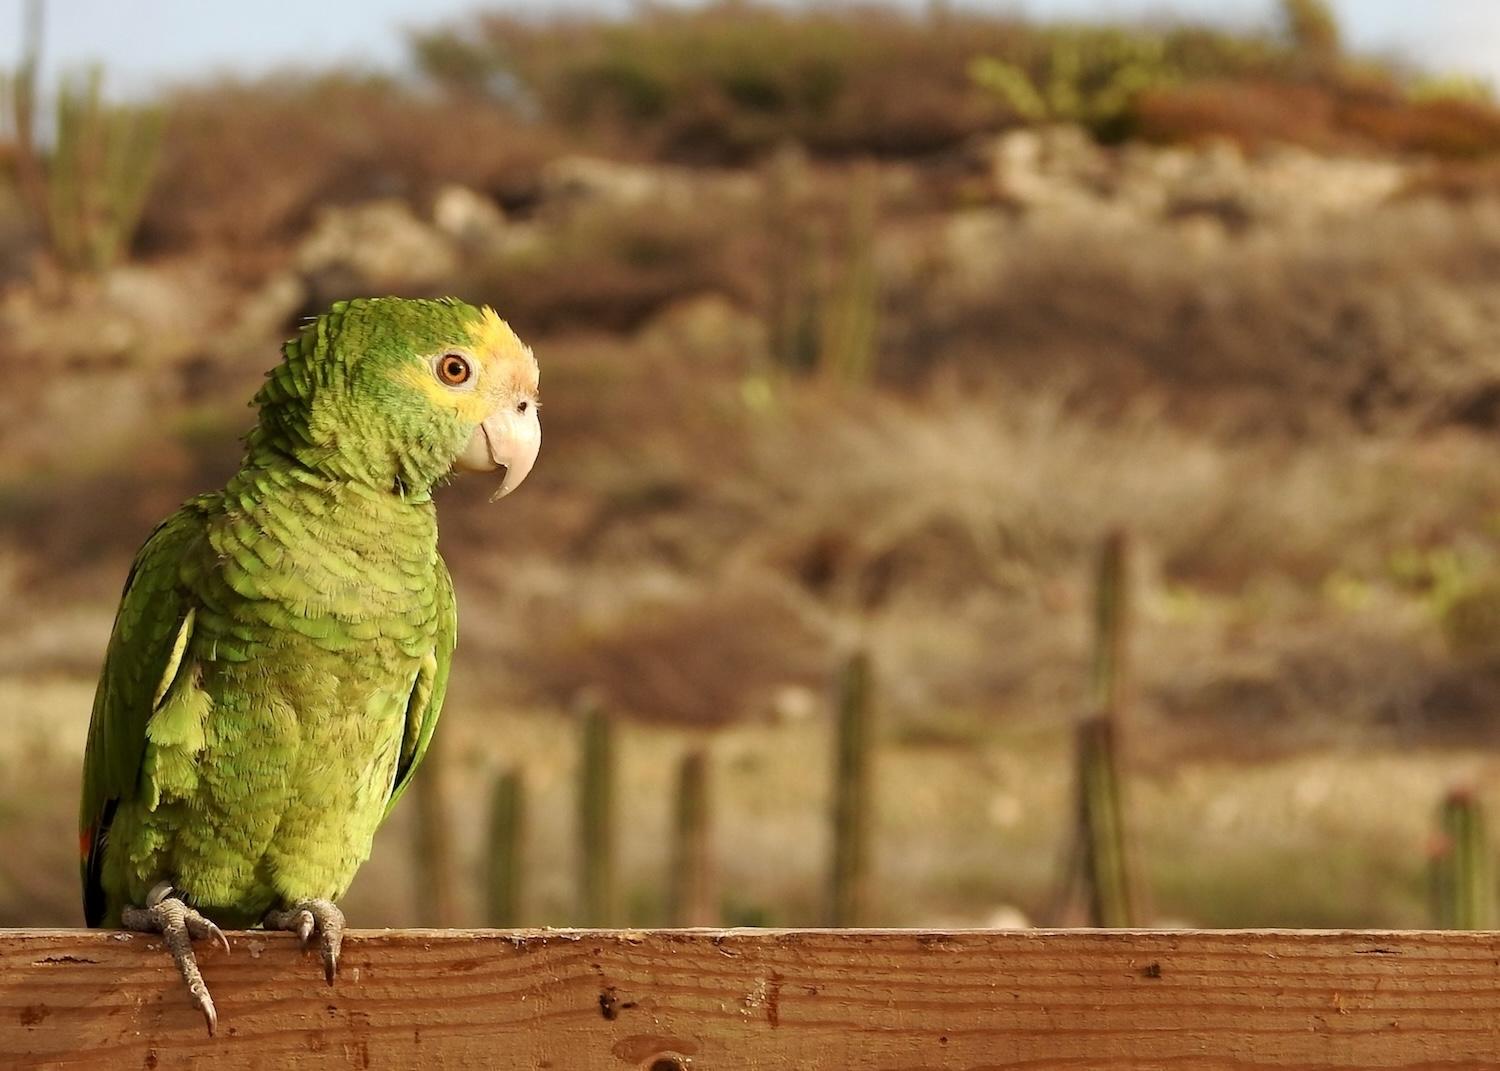 In Arikok National Park on Aruba, a locally extinct parrot known as the Lora (a Yellow-shouldered Amazon) has just been reintroduced.